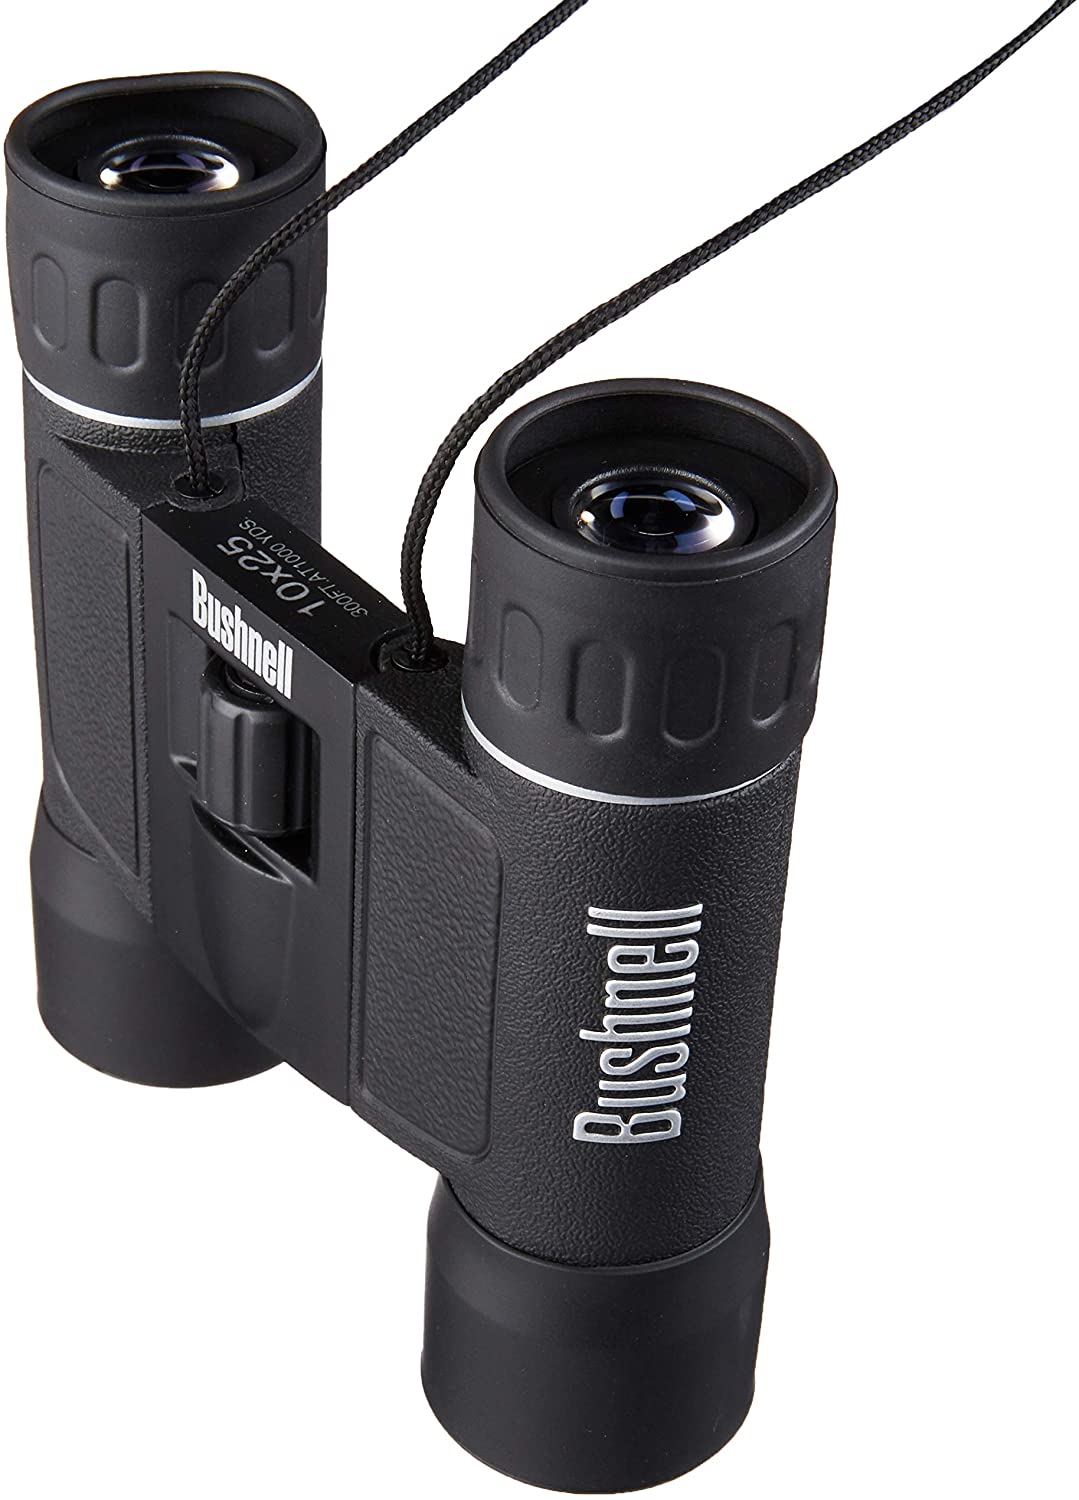 Bushnell Powerview Compact Folding Roof Prism 10x25 Binocular $10 + free shipping w/ Prime or on Orders over $25 (backorder)